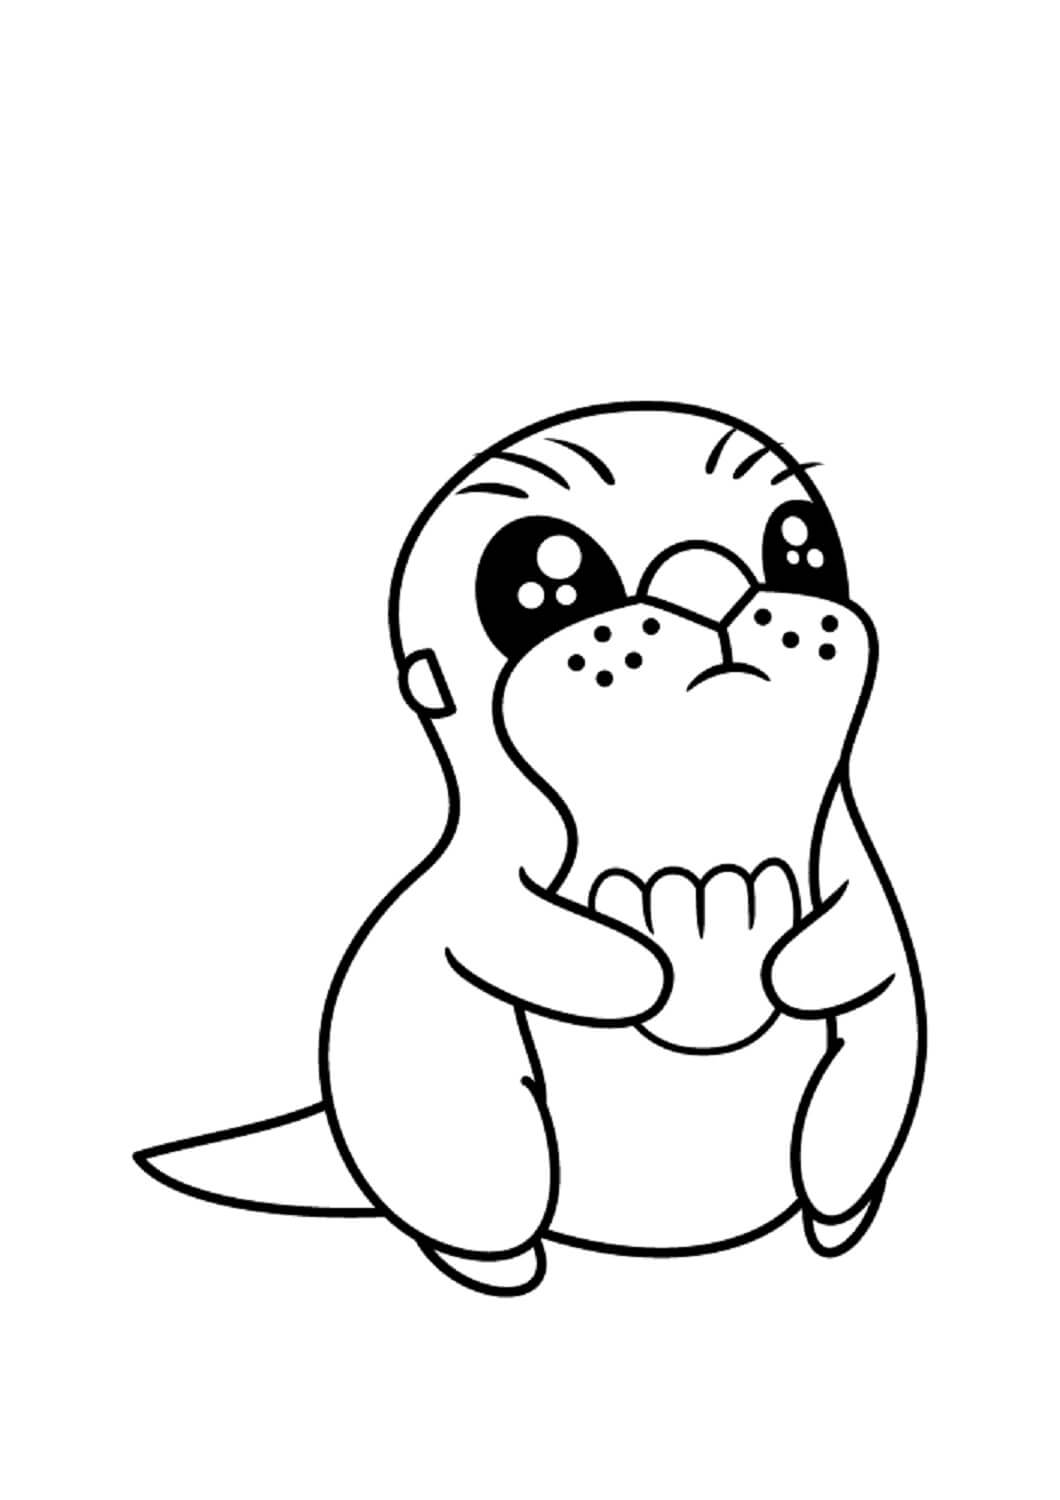 Cute Baby Otter Sitting coloring page - Download, Print or Color Online ...